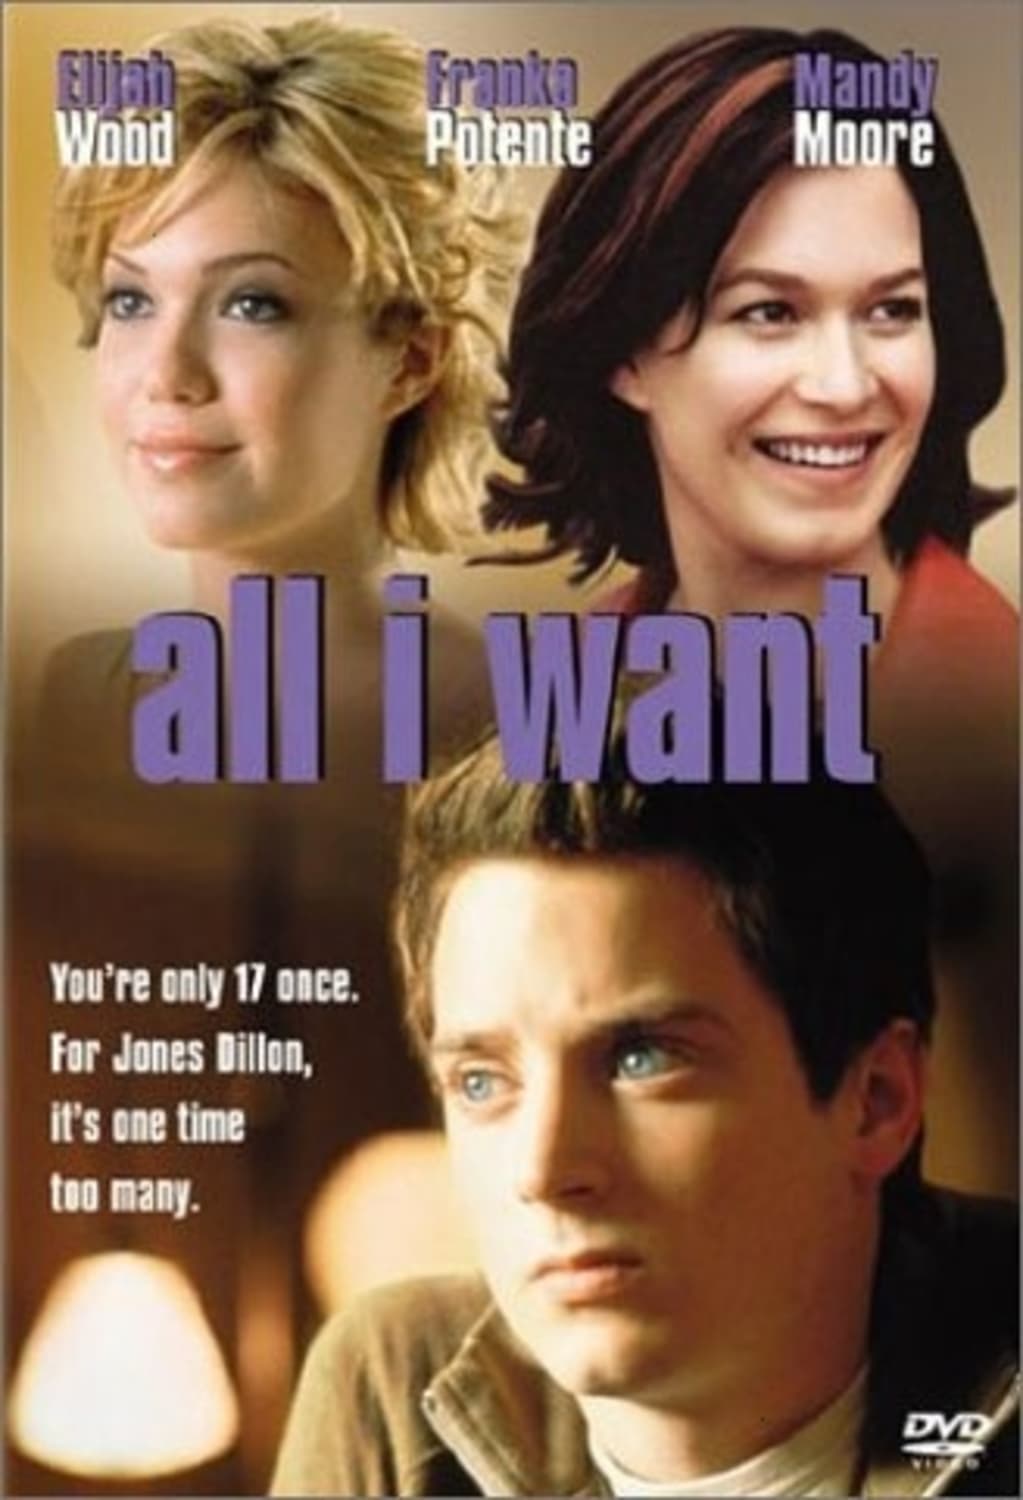 All I Want (DVD) on MovieShack